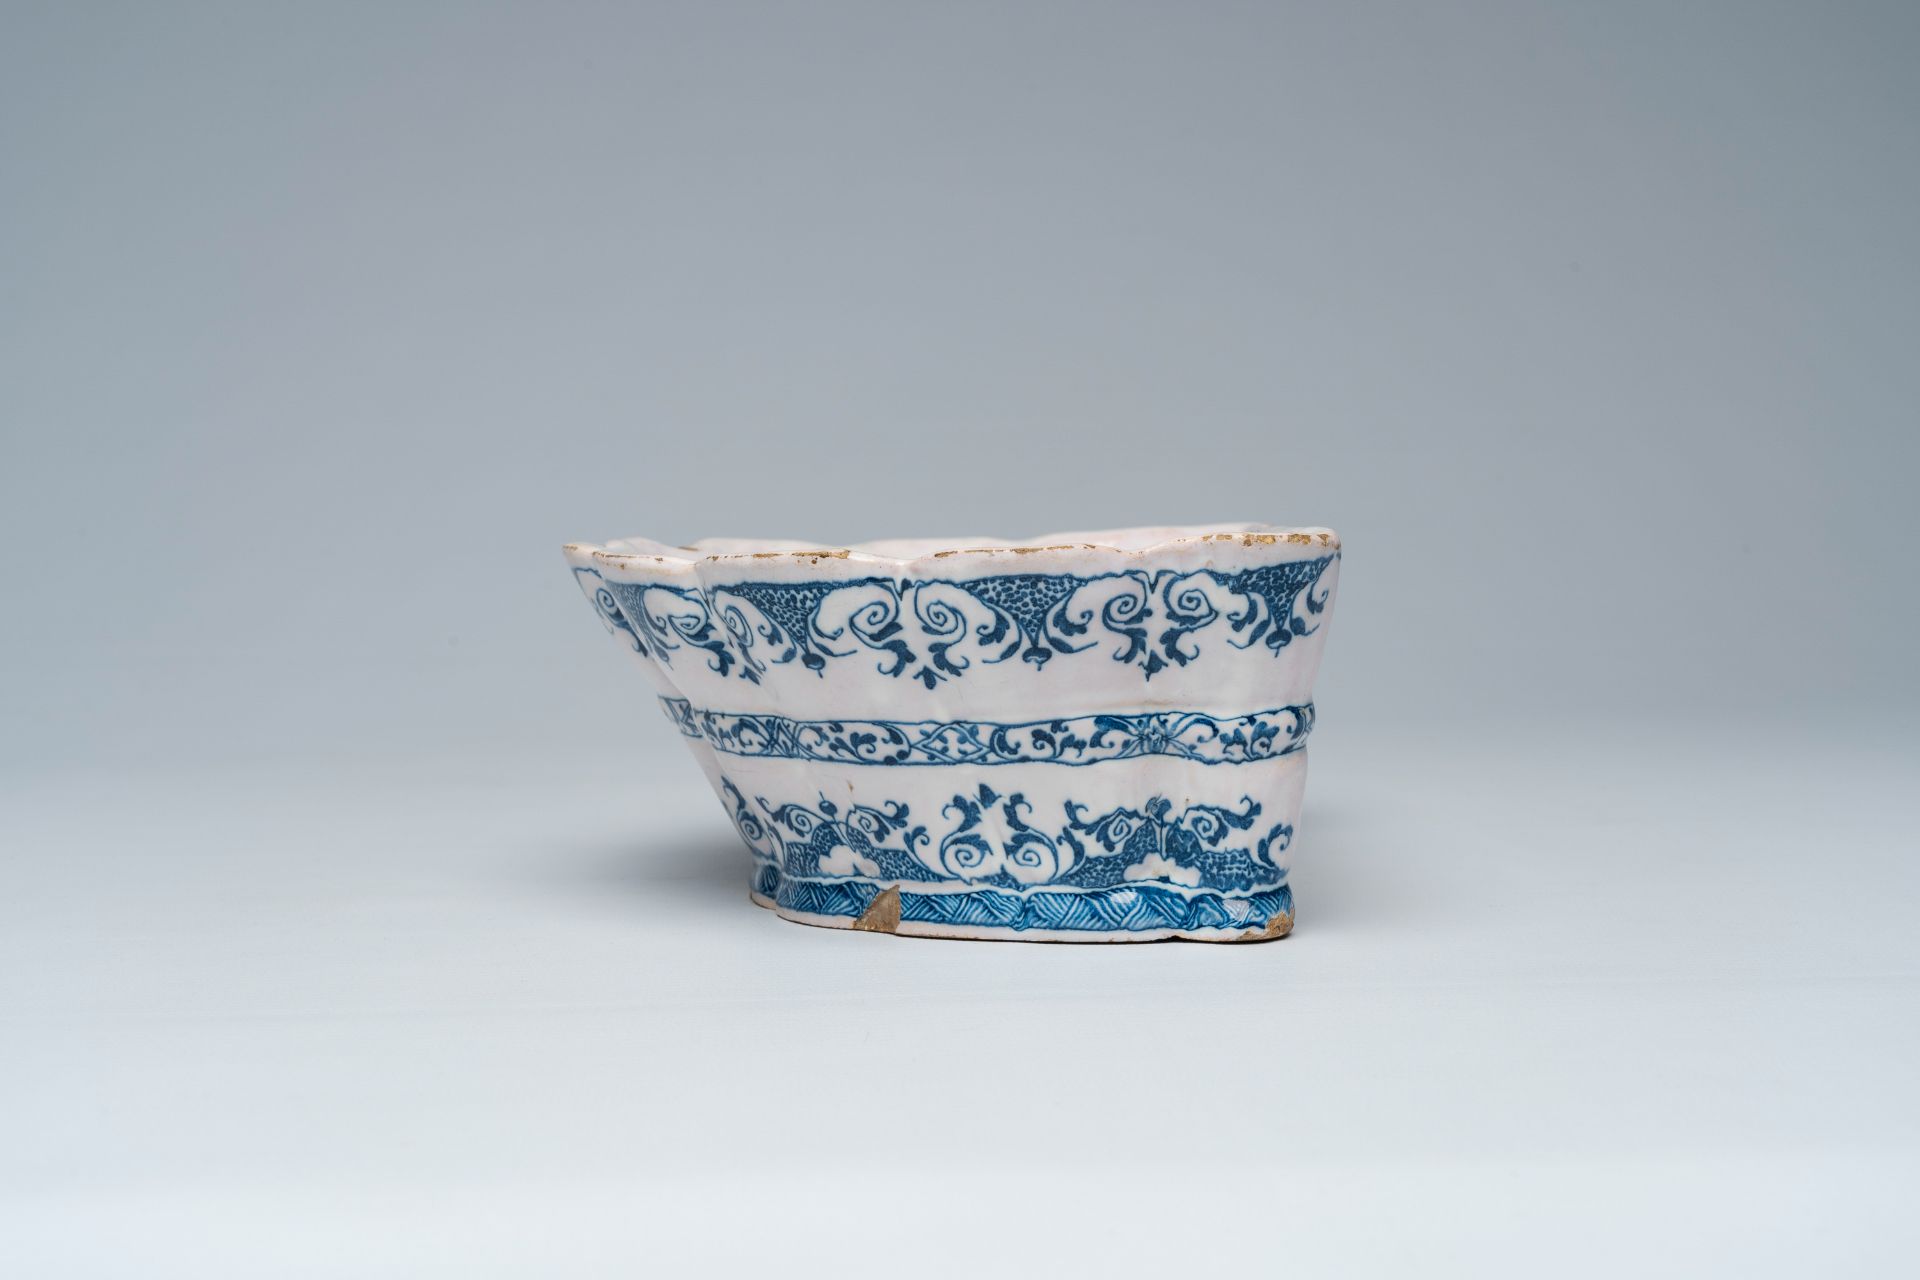 A blue and white Moustiers faience flower holder, France, 18th C. - Image 3 of 7